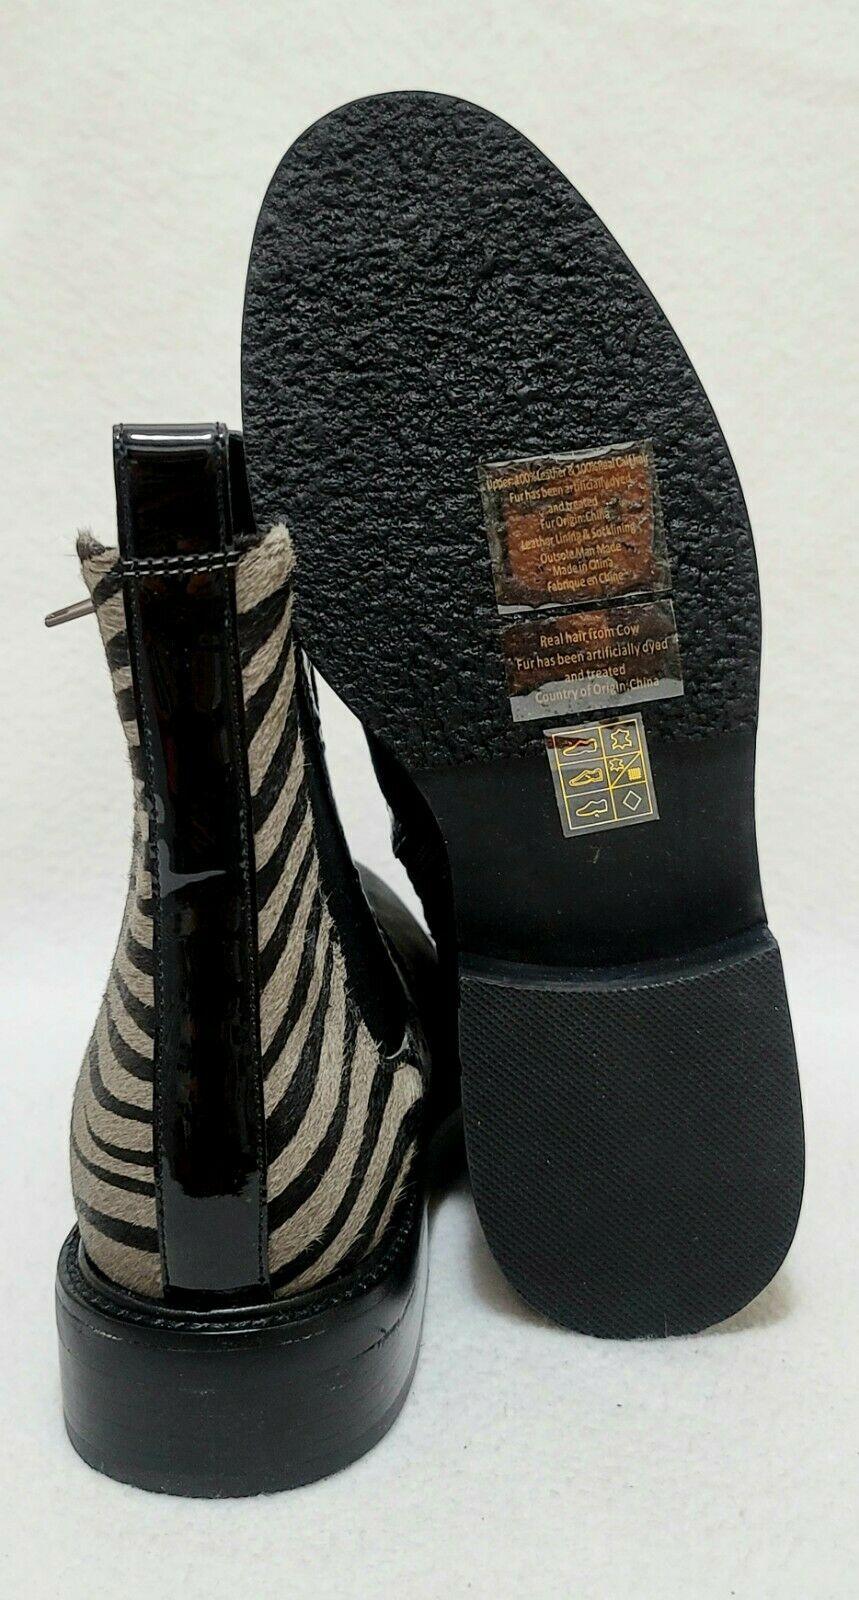 JEFFREY CAMPBELL EDMOND Leather Chelsea Boots Grey Exotic  Size US 7 - SVNYFancy